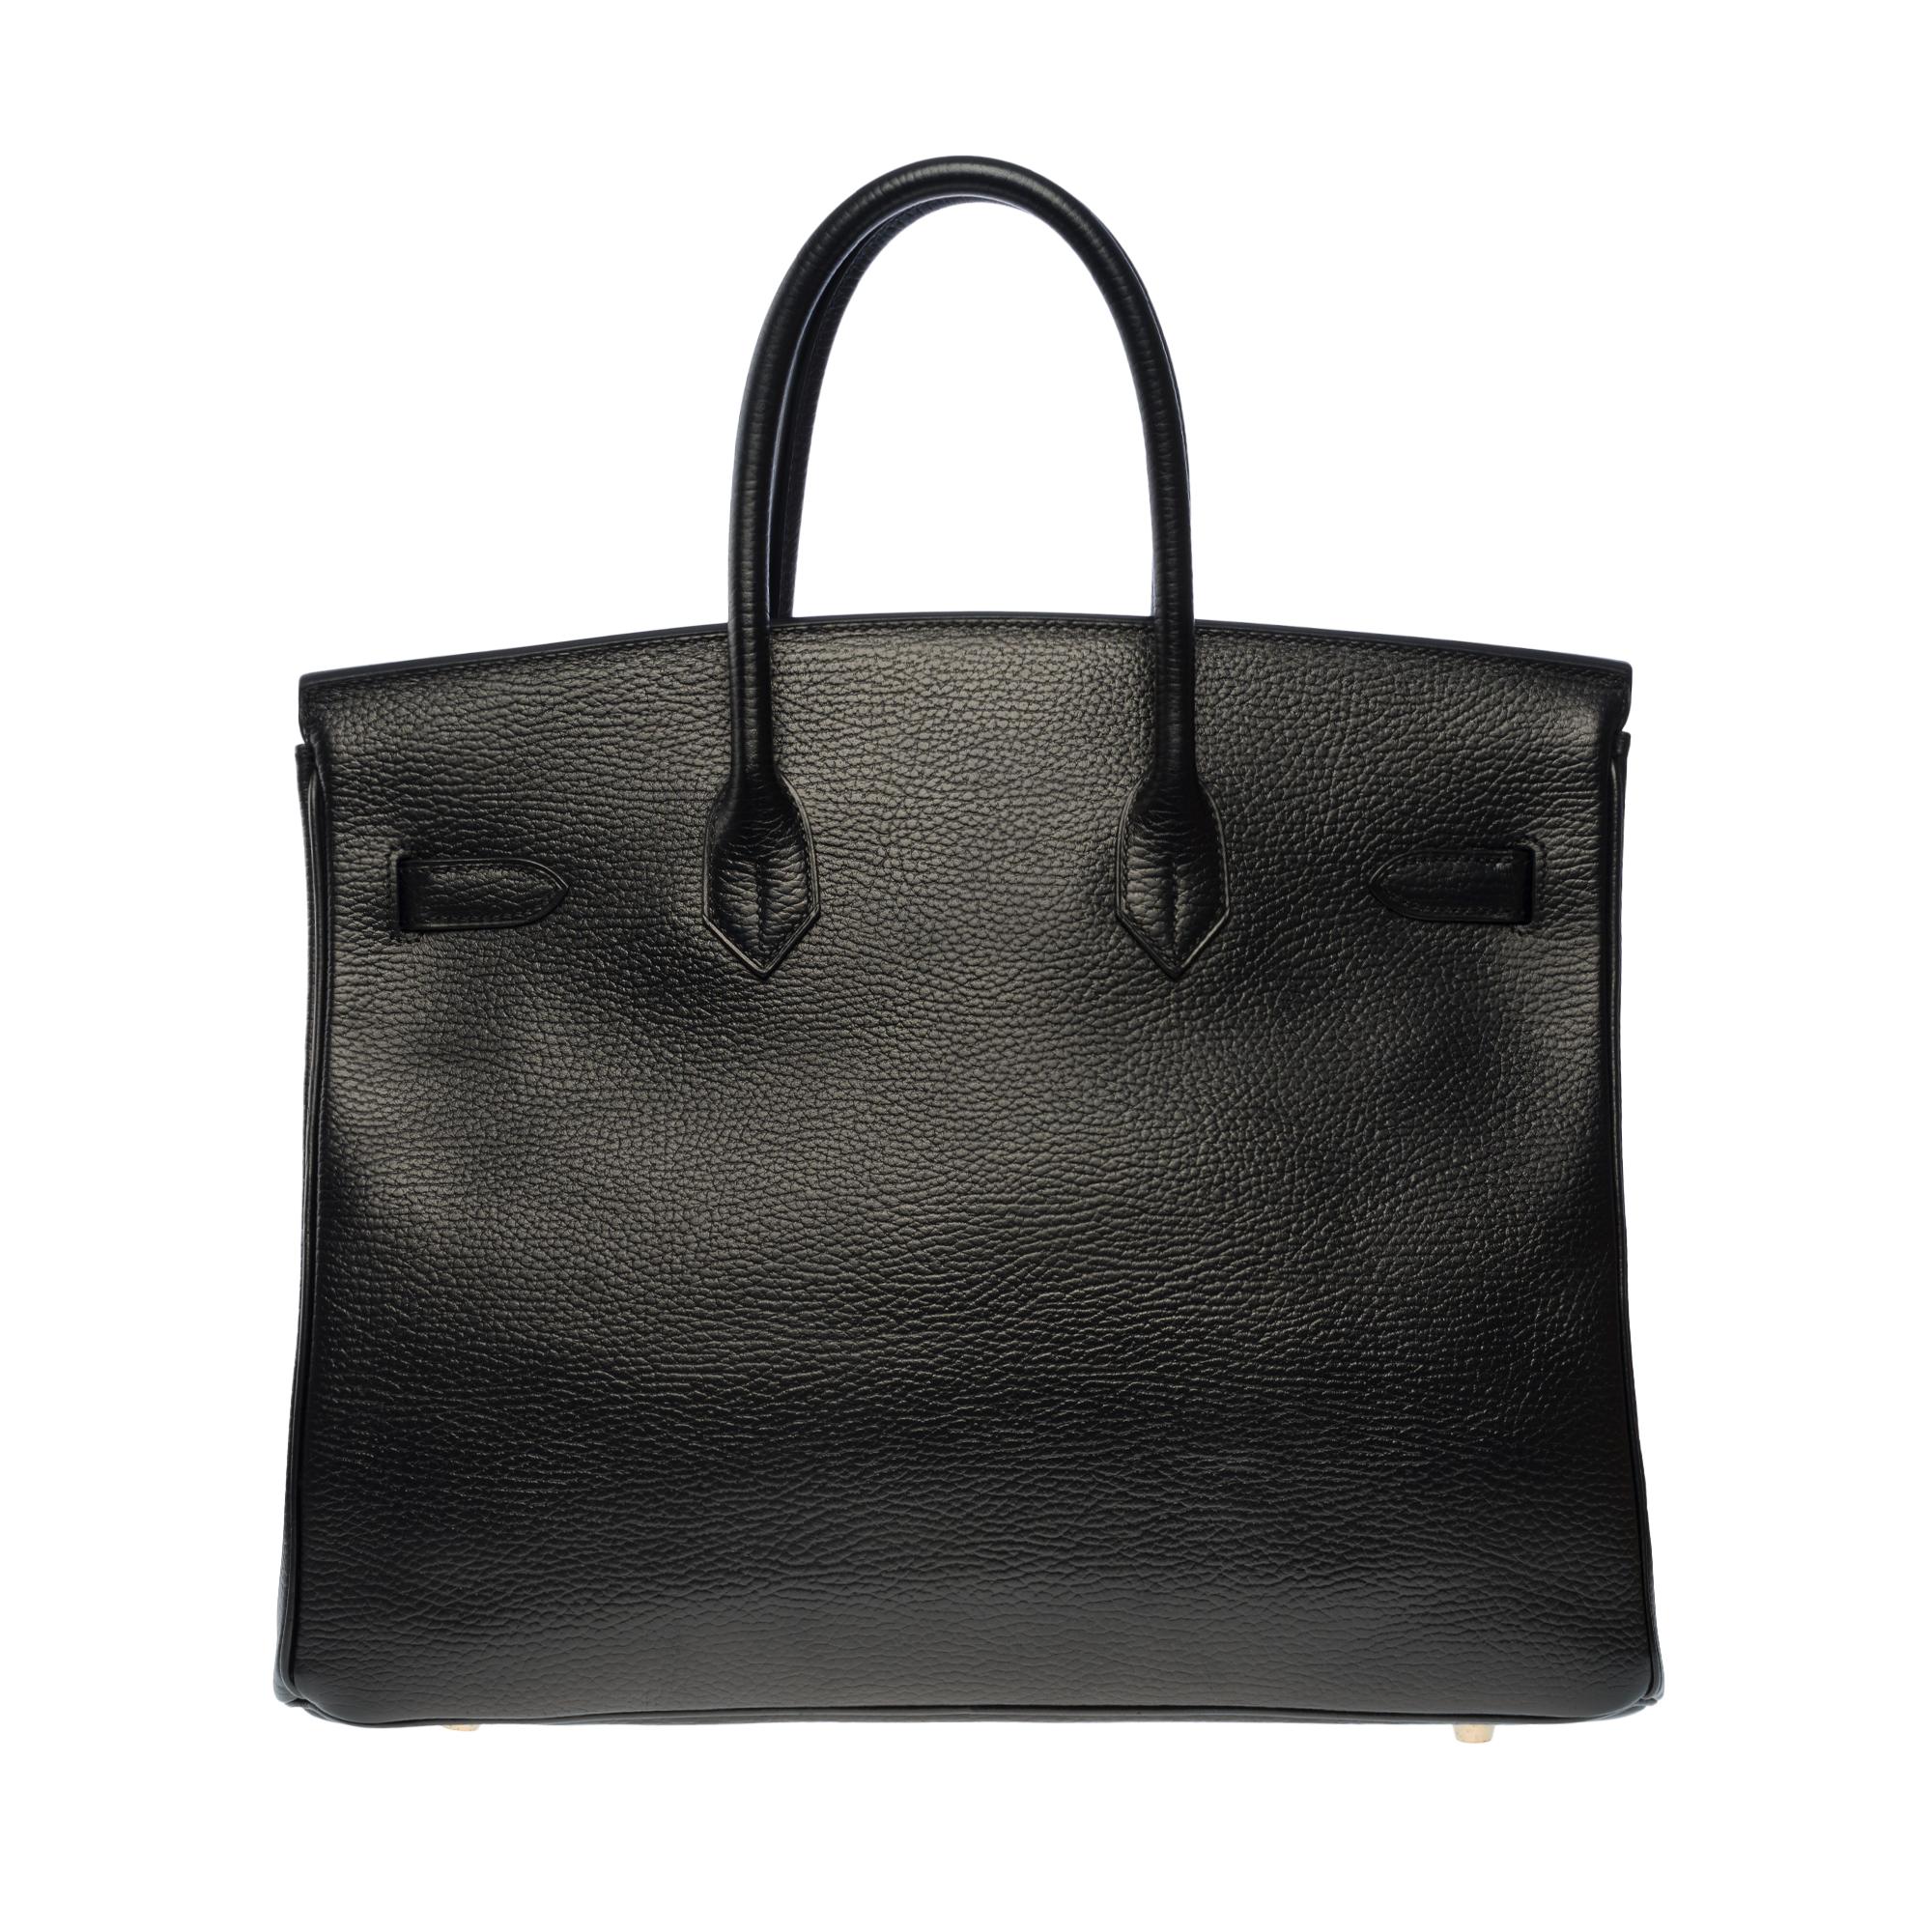 Amazing Birkin 35 handbag in black Togo leather , gold-plated metal hardware, double black leather handle for hand Carry

Flap closure
Black leather lining, one zippered pocket, one patch pocket
Signature: 